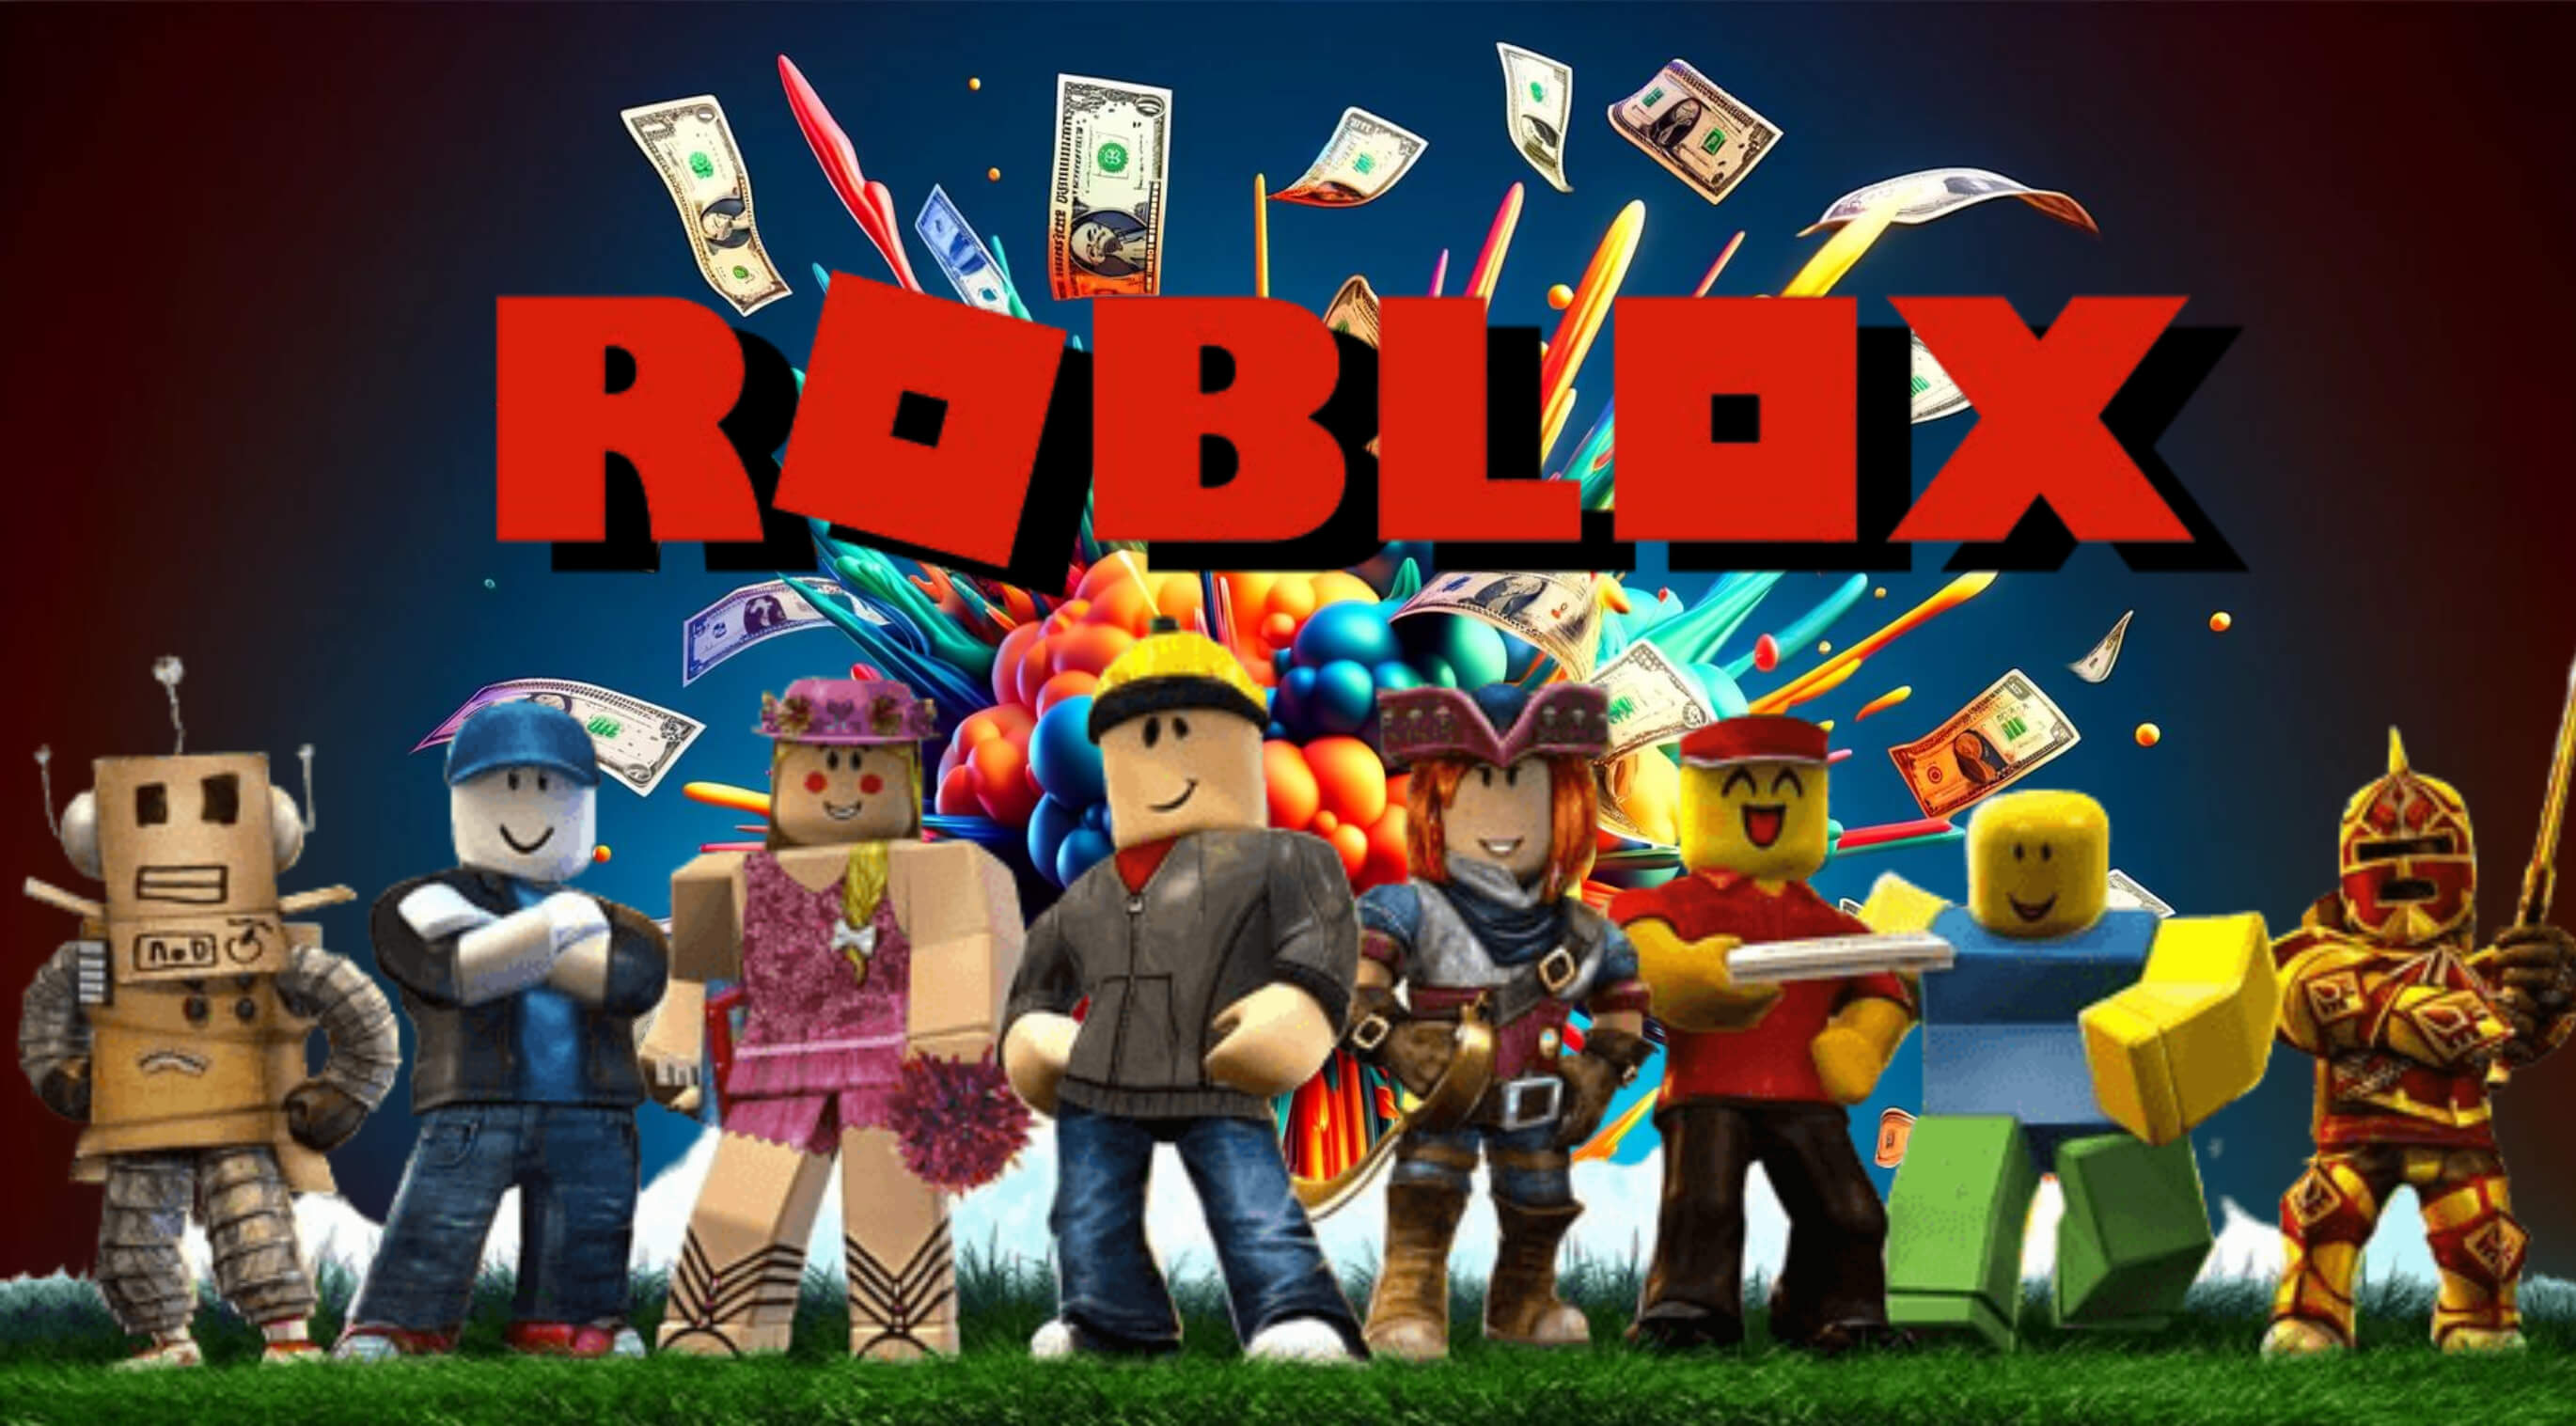 NYSE:RBLX Analysis - Roblox's Financial Health and Market Positioning